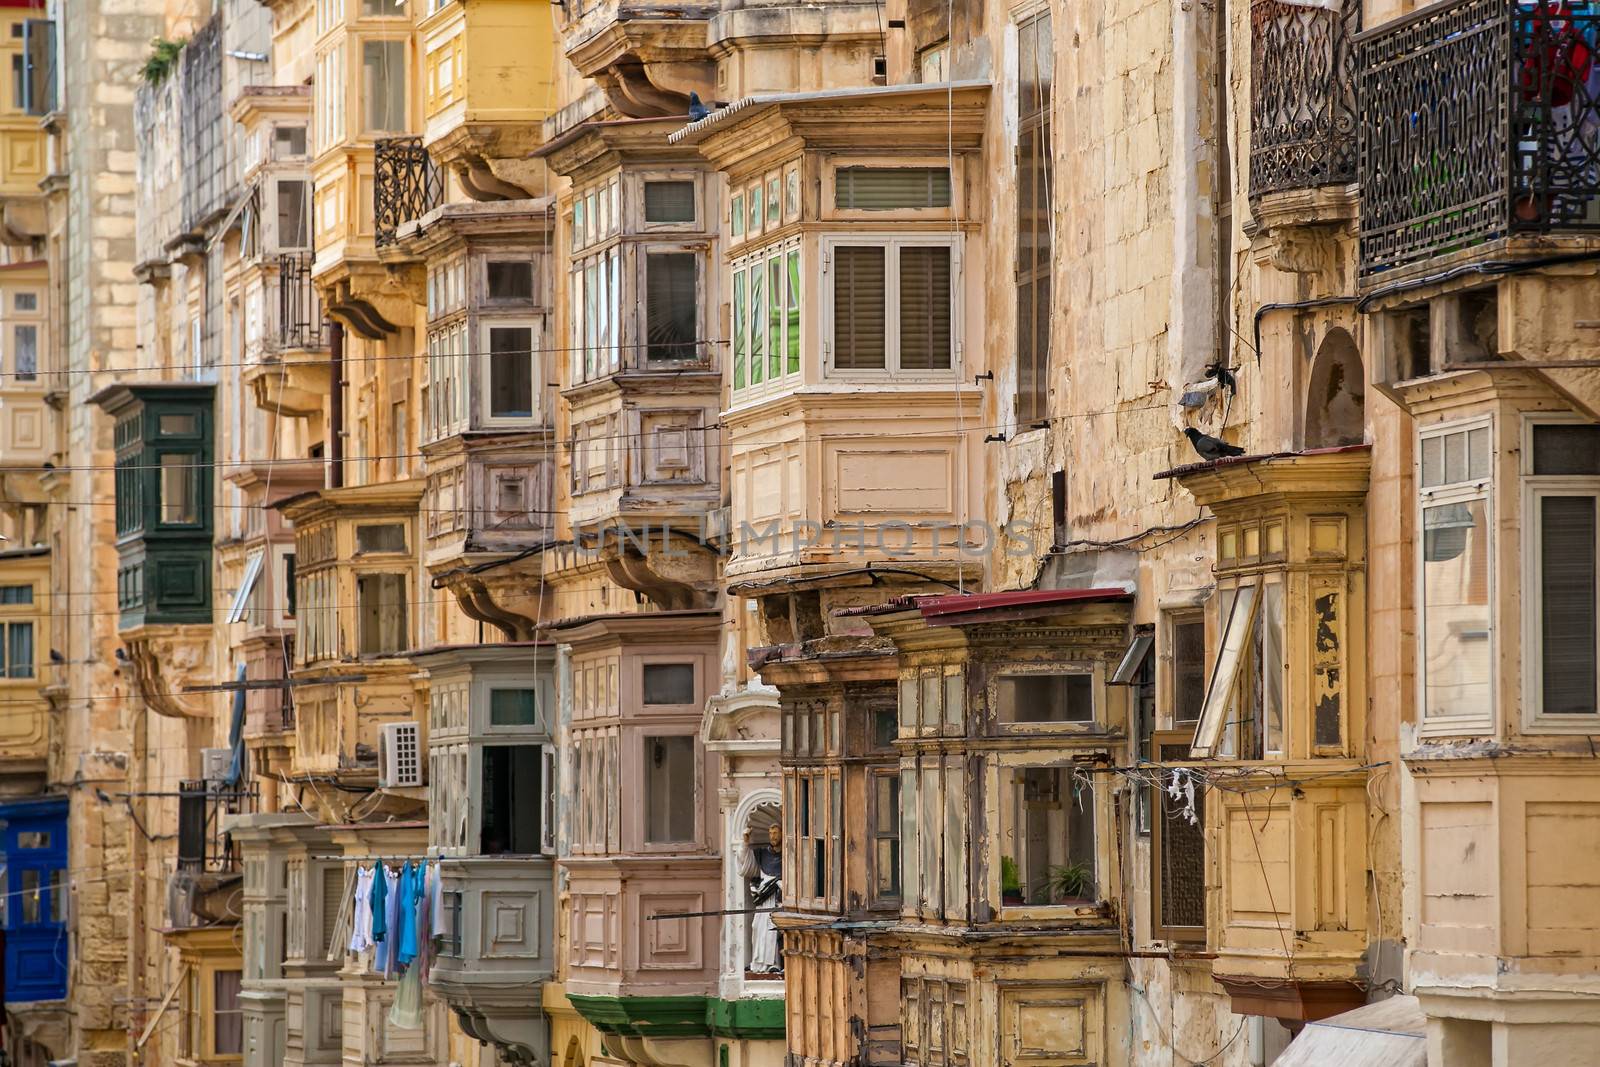 Detail shot of wooden balconies in obe of the streets of Valletta in Malta.